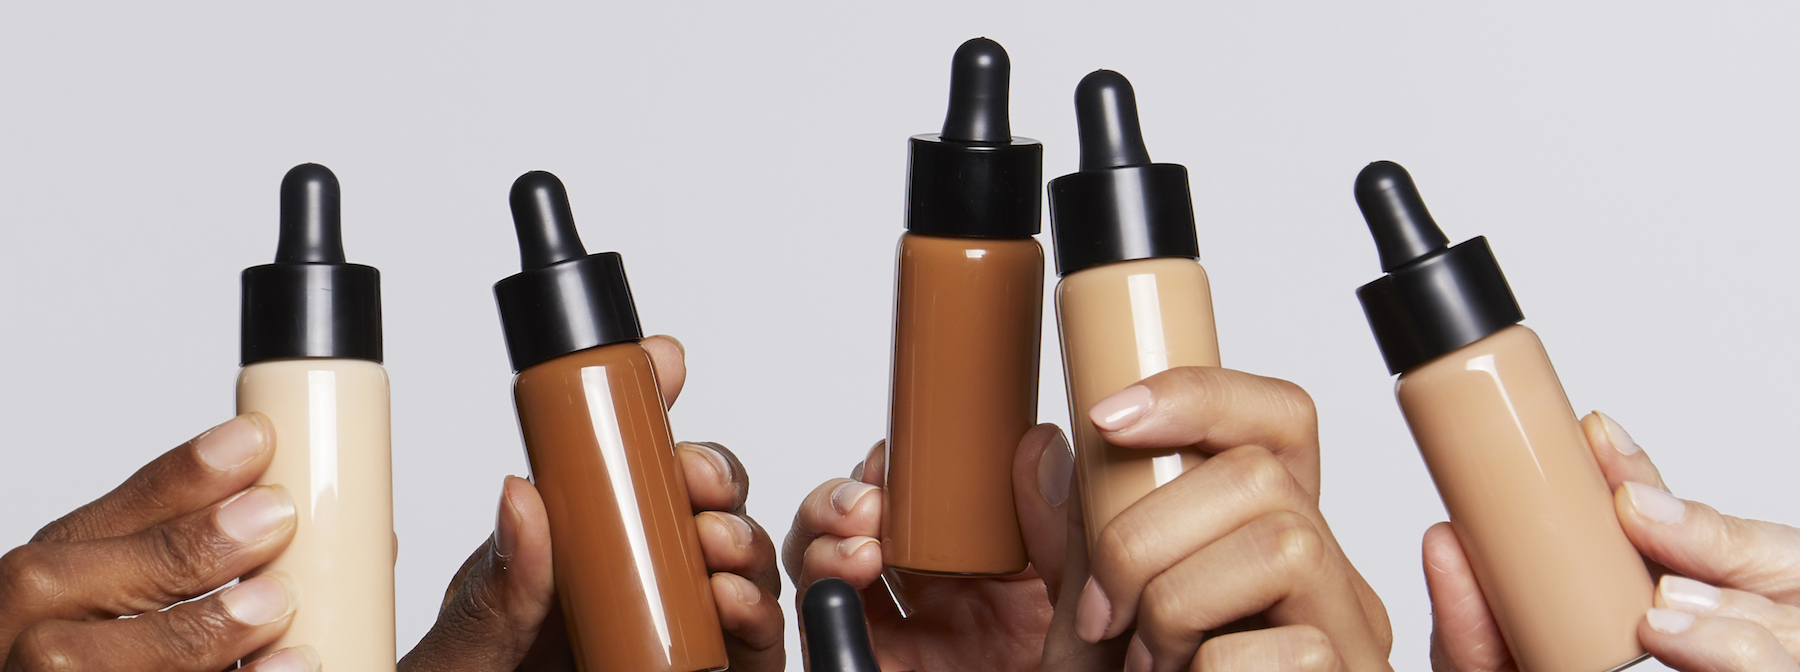 Find Your Perfect Foundation Shade with Dermablend - Skinstore US